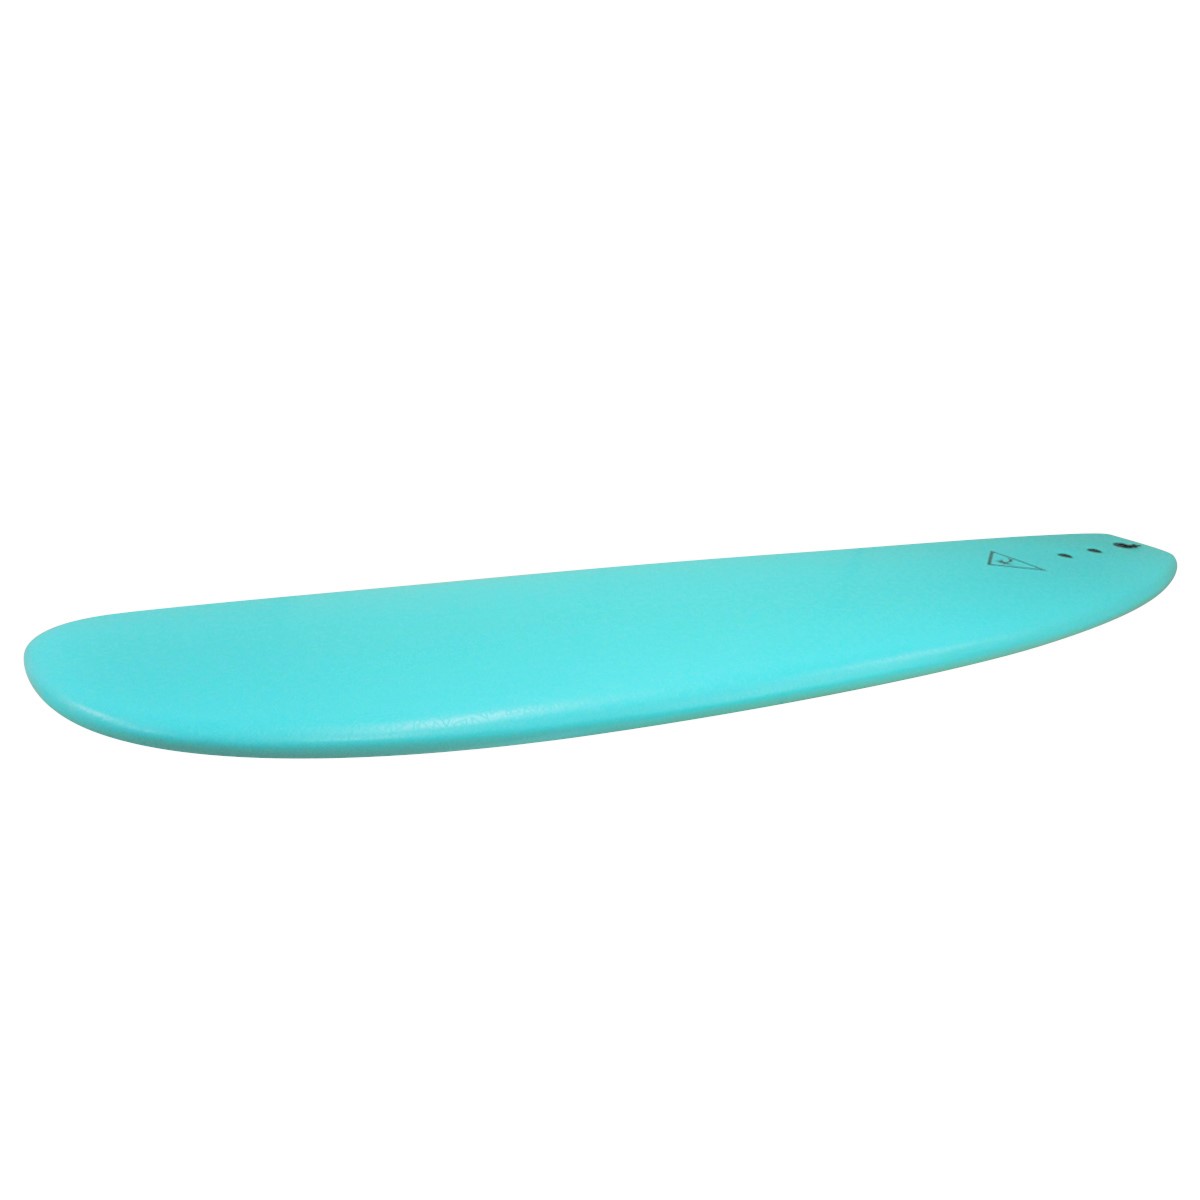 CATCH SURF / HERITAGE 8`6 NOSERIDER SINGLE FIN